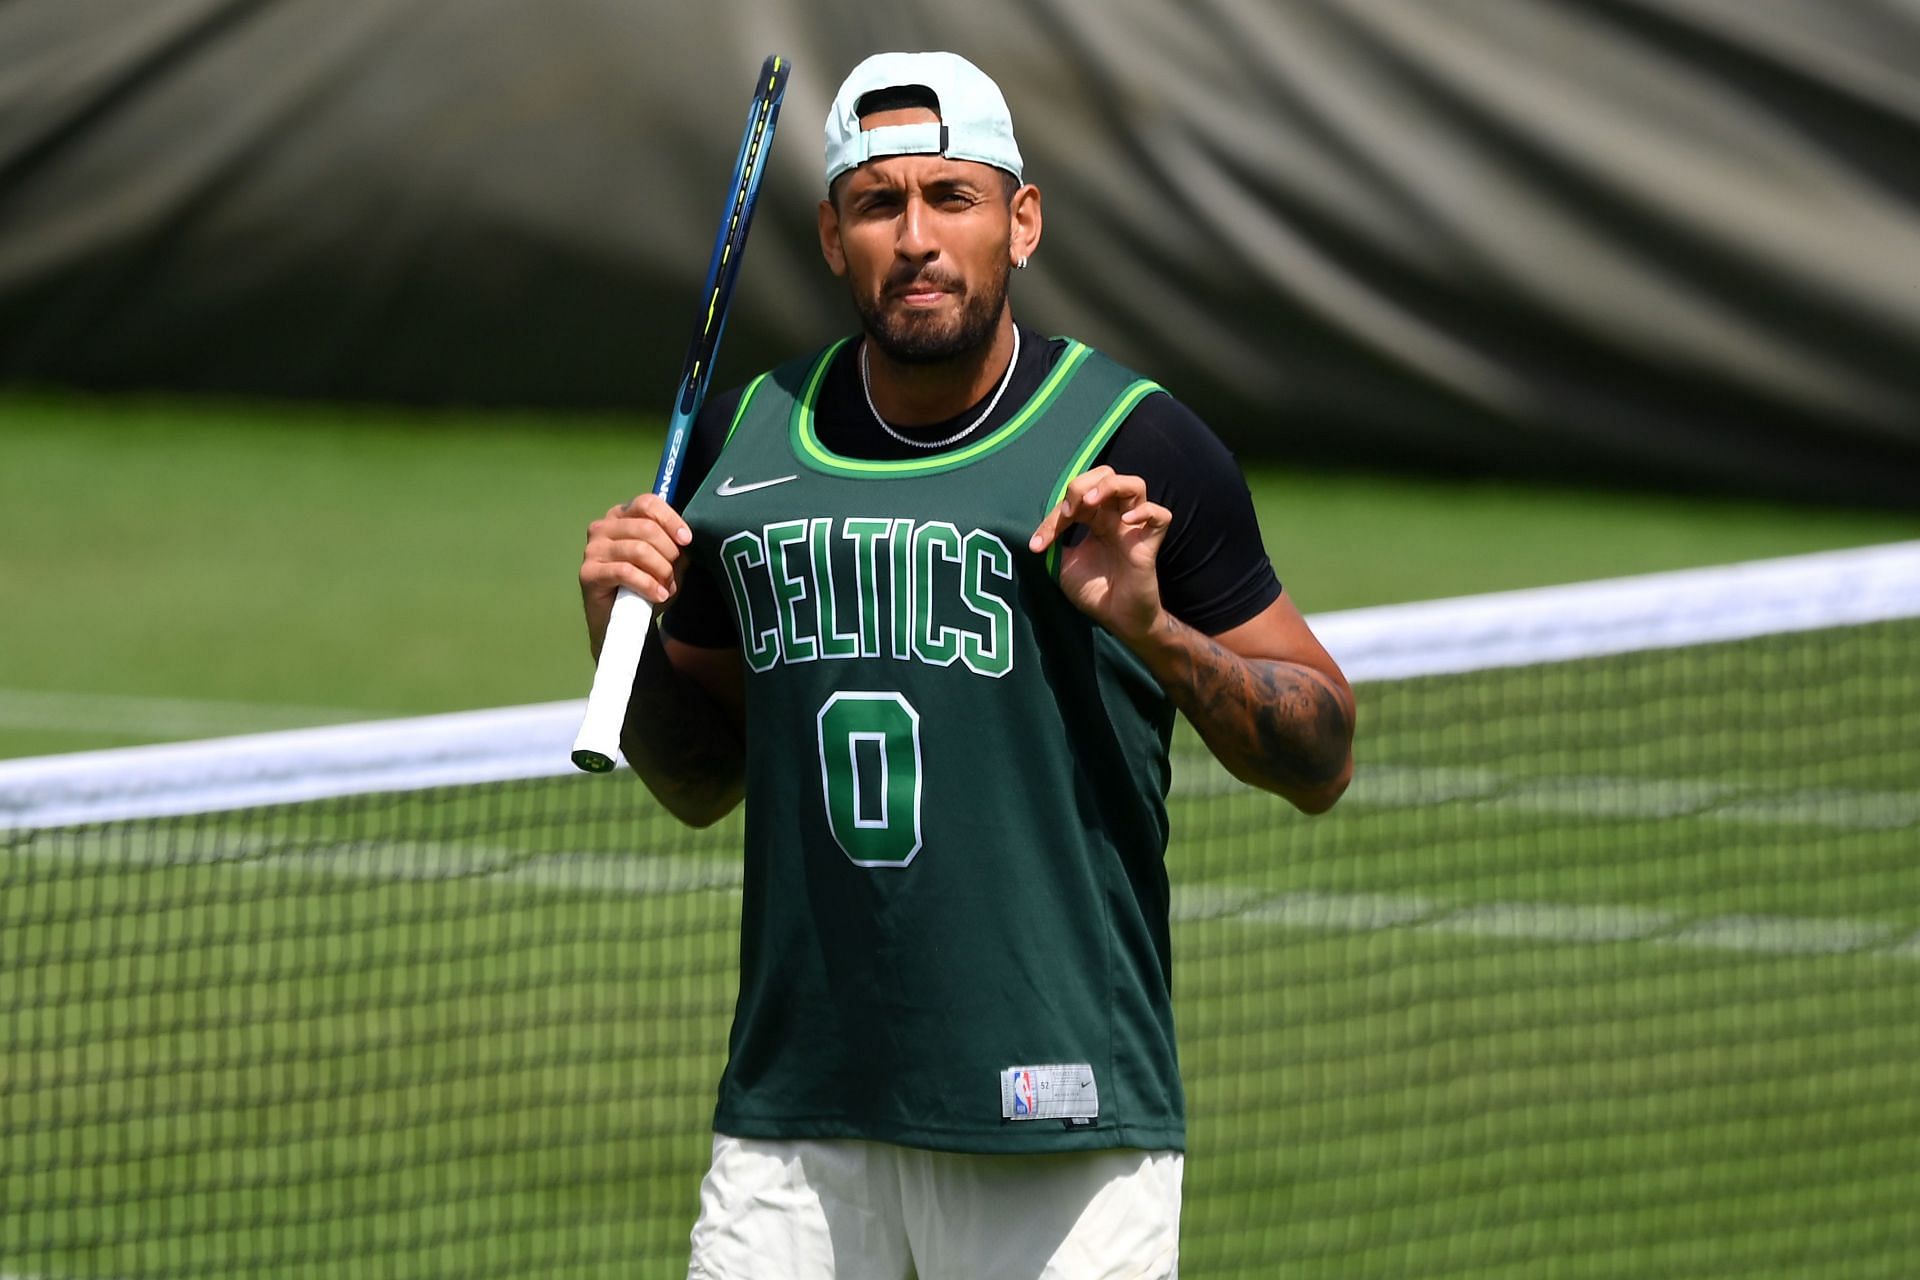 Nick Kyrgios wearing a Boston Celtics jersey during a practice session at the Wimbledon in 2022.